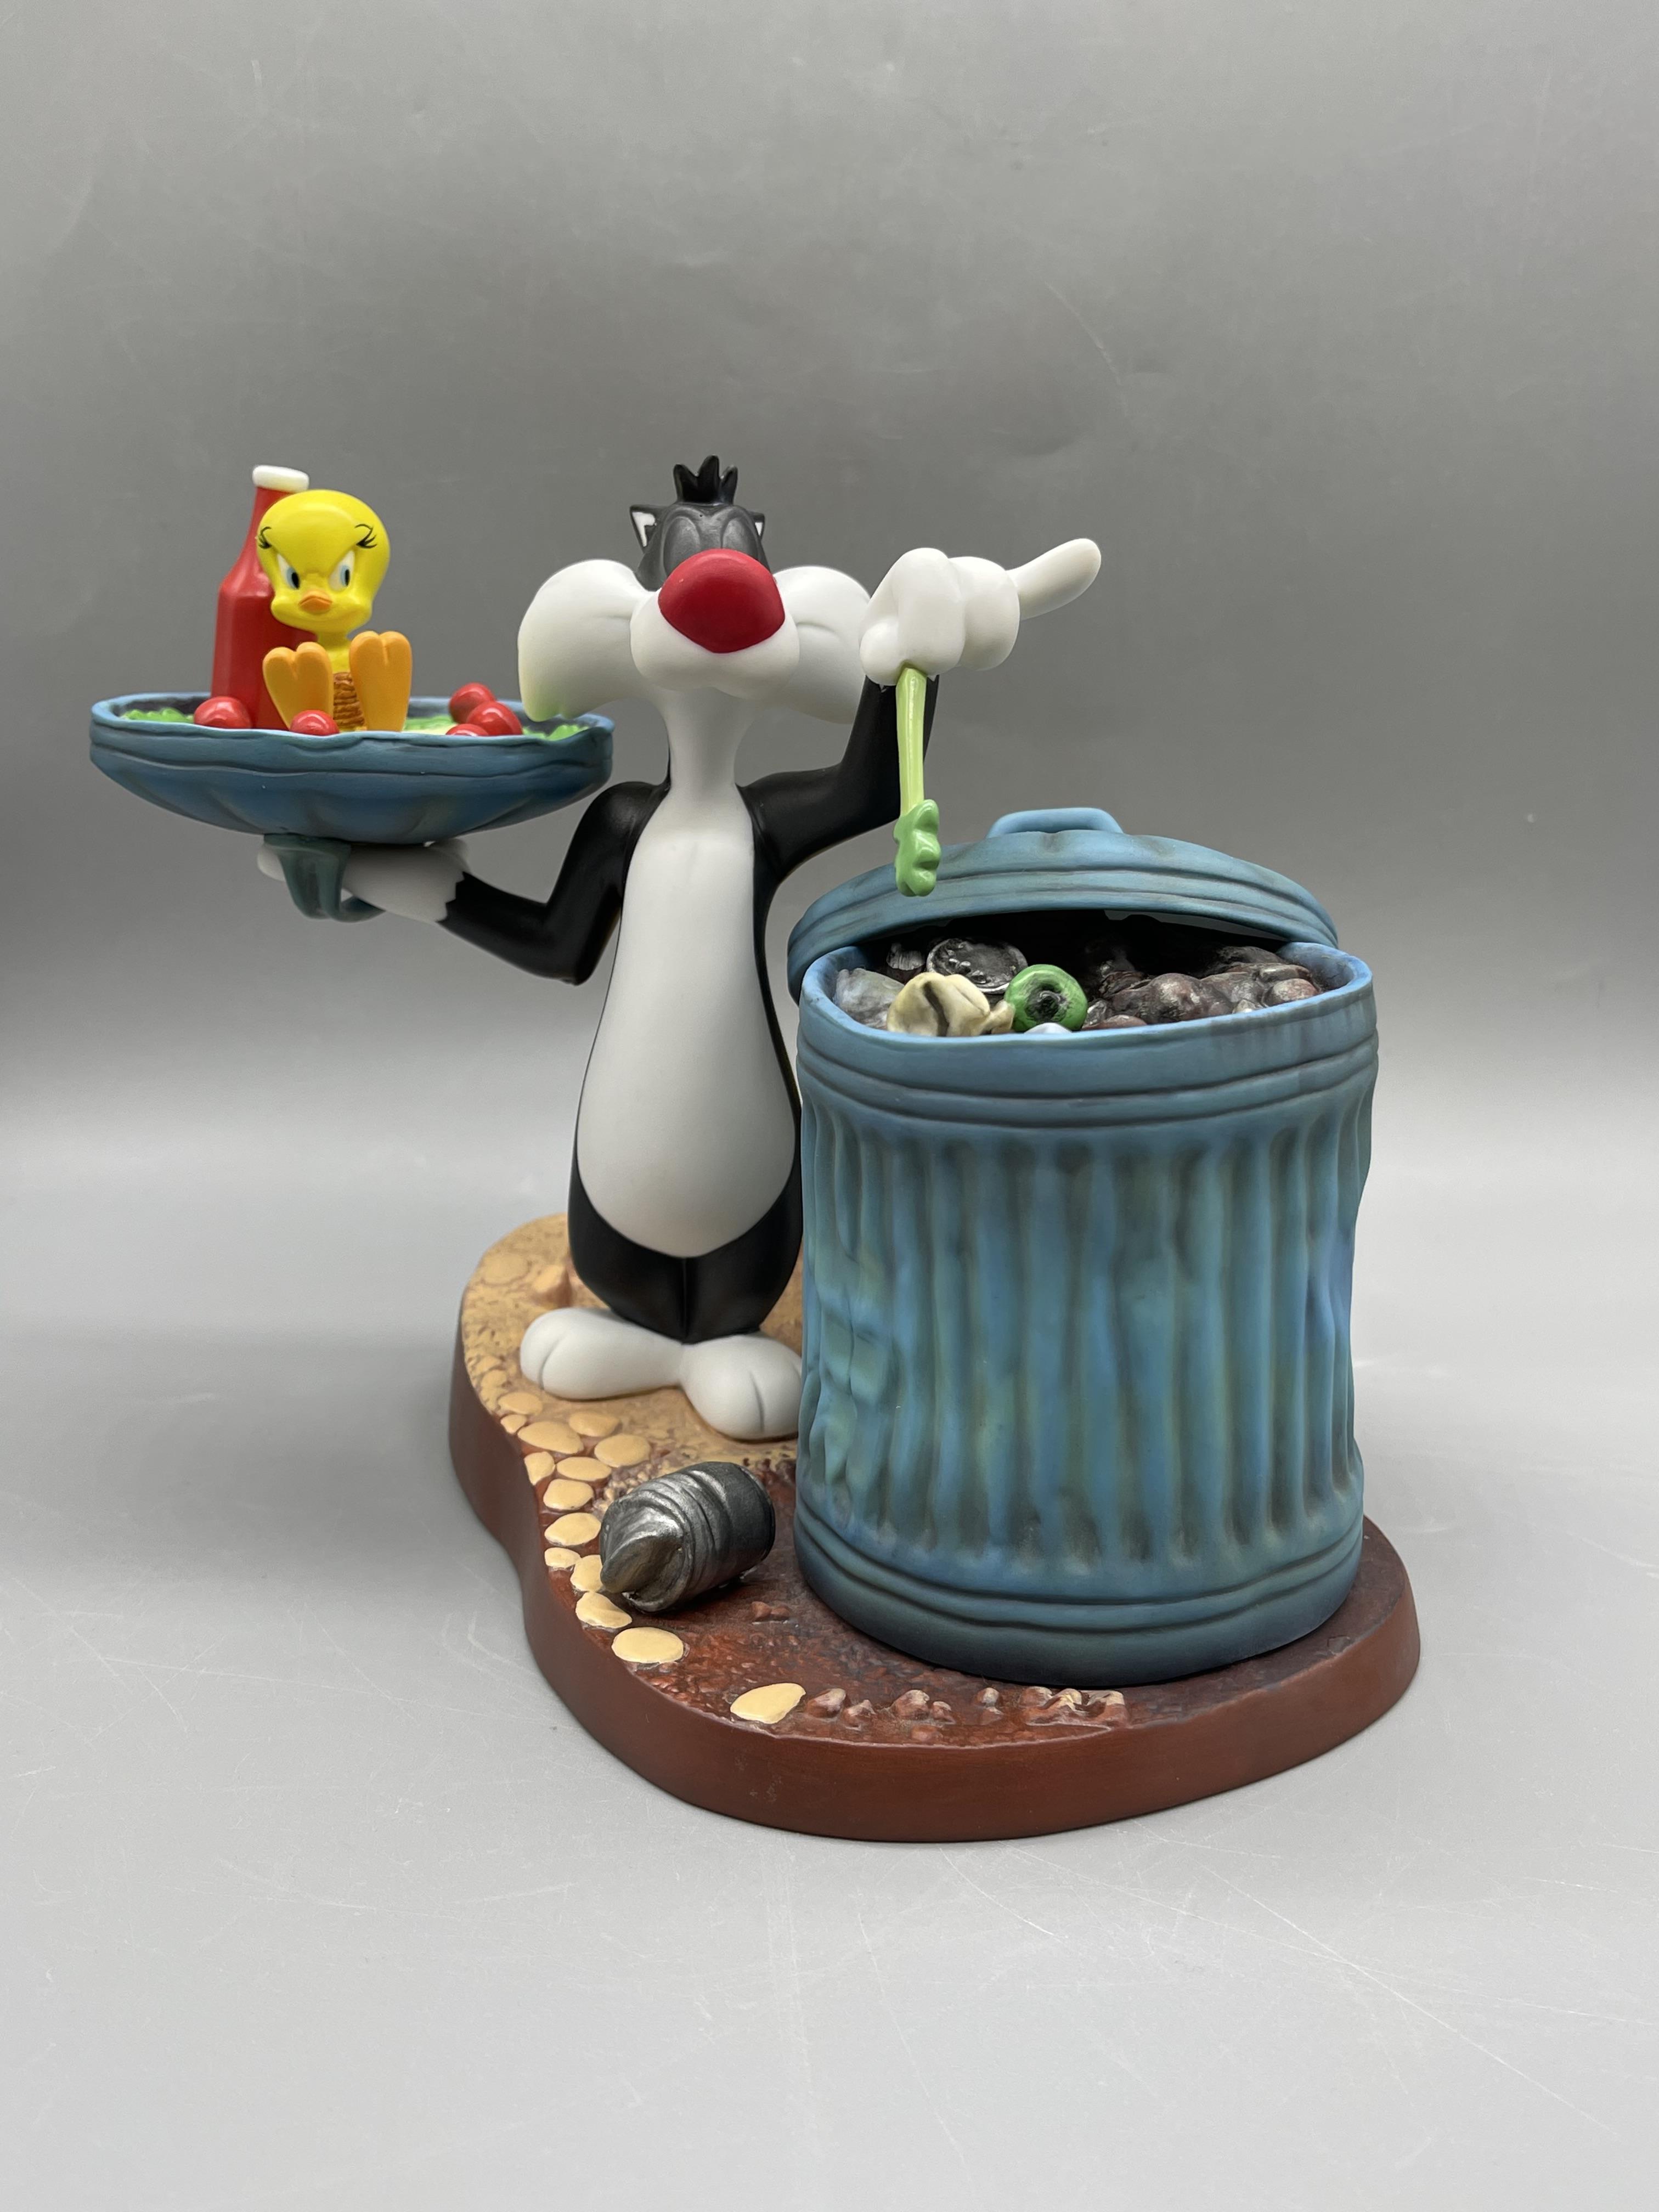 Boxed Wedgewood - Looney Tunes - Sylvester's Buffe - Image 3 of 18